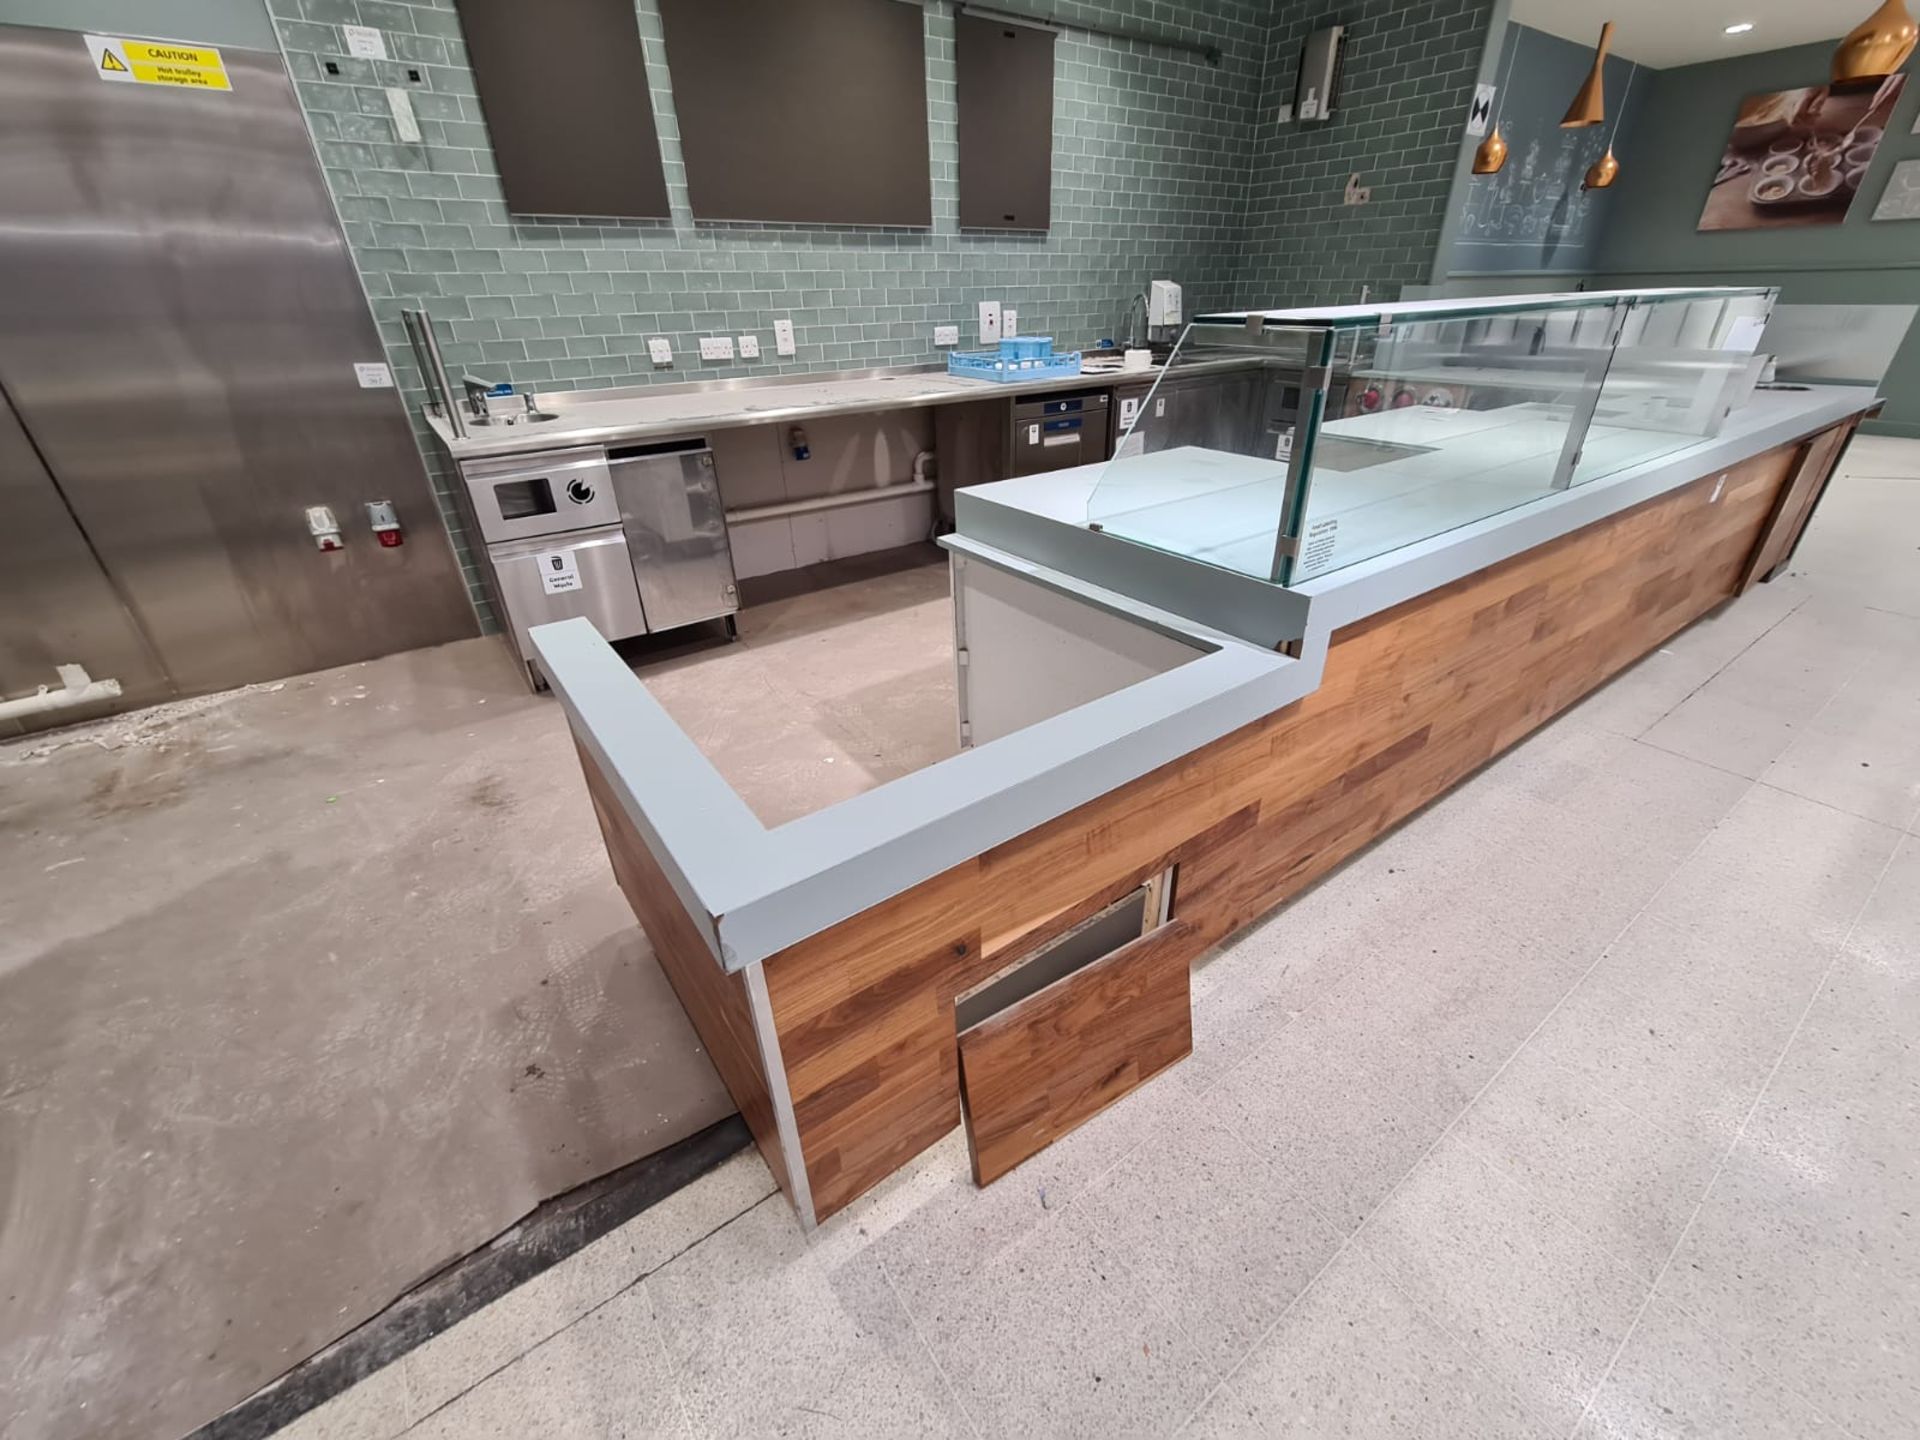 Serving Counter with Glass Display Front - Image 3 of 9